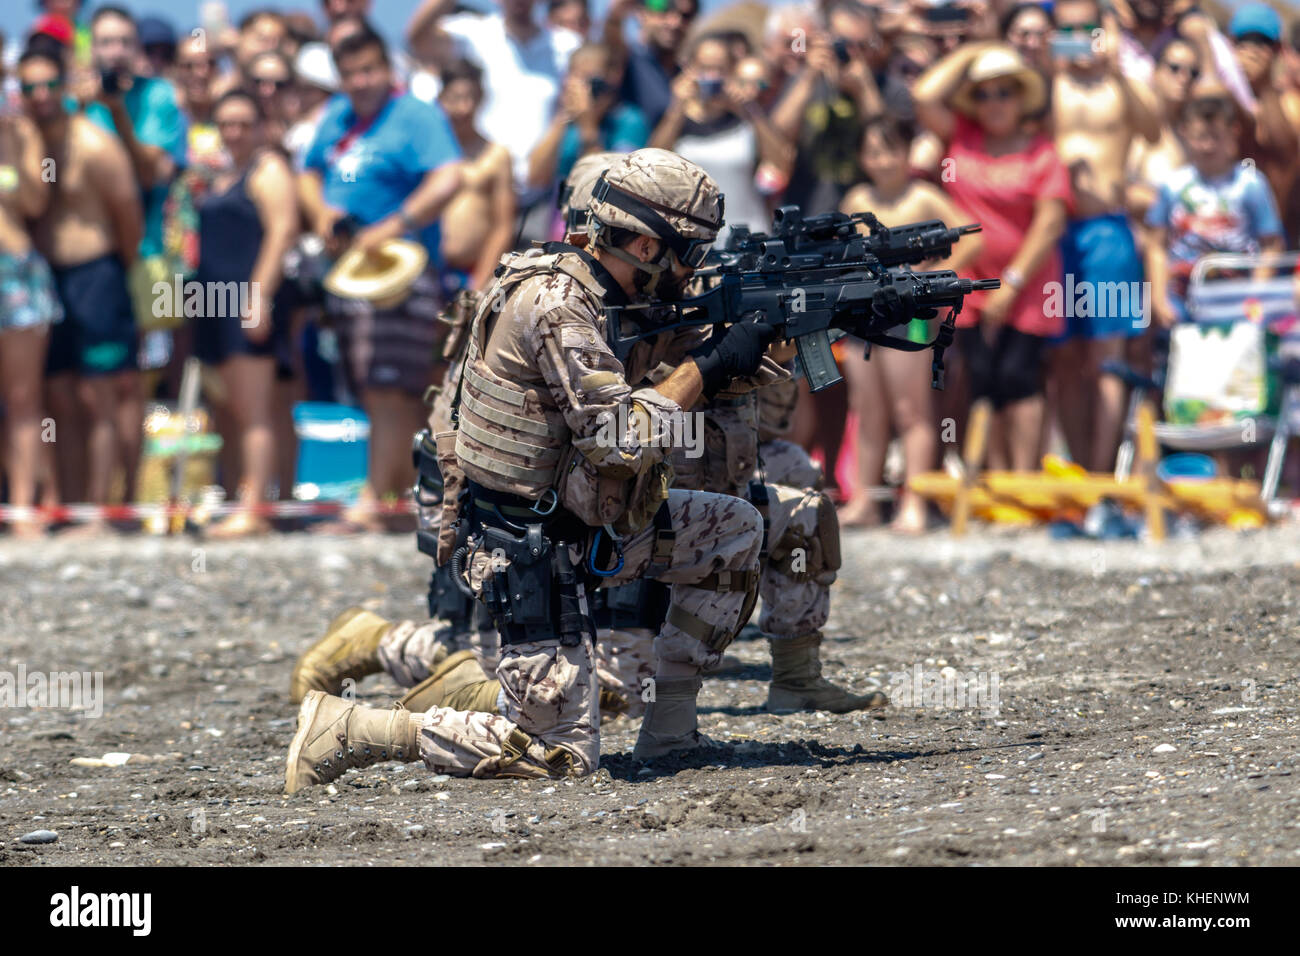 MOTRIL, GRANADA, SPAIN-JUN 11: Spanish Marines taking part in an exhibition on the 12th international airshow of Motril on Jun 11, 2017, in Motril, Gr Stock Photo